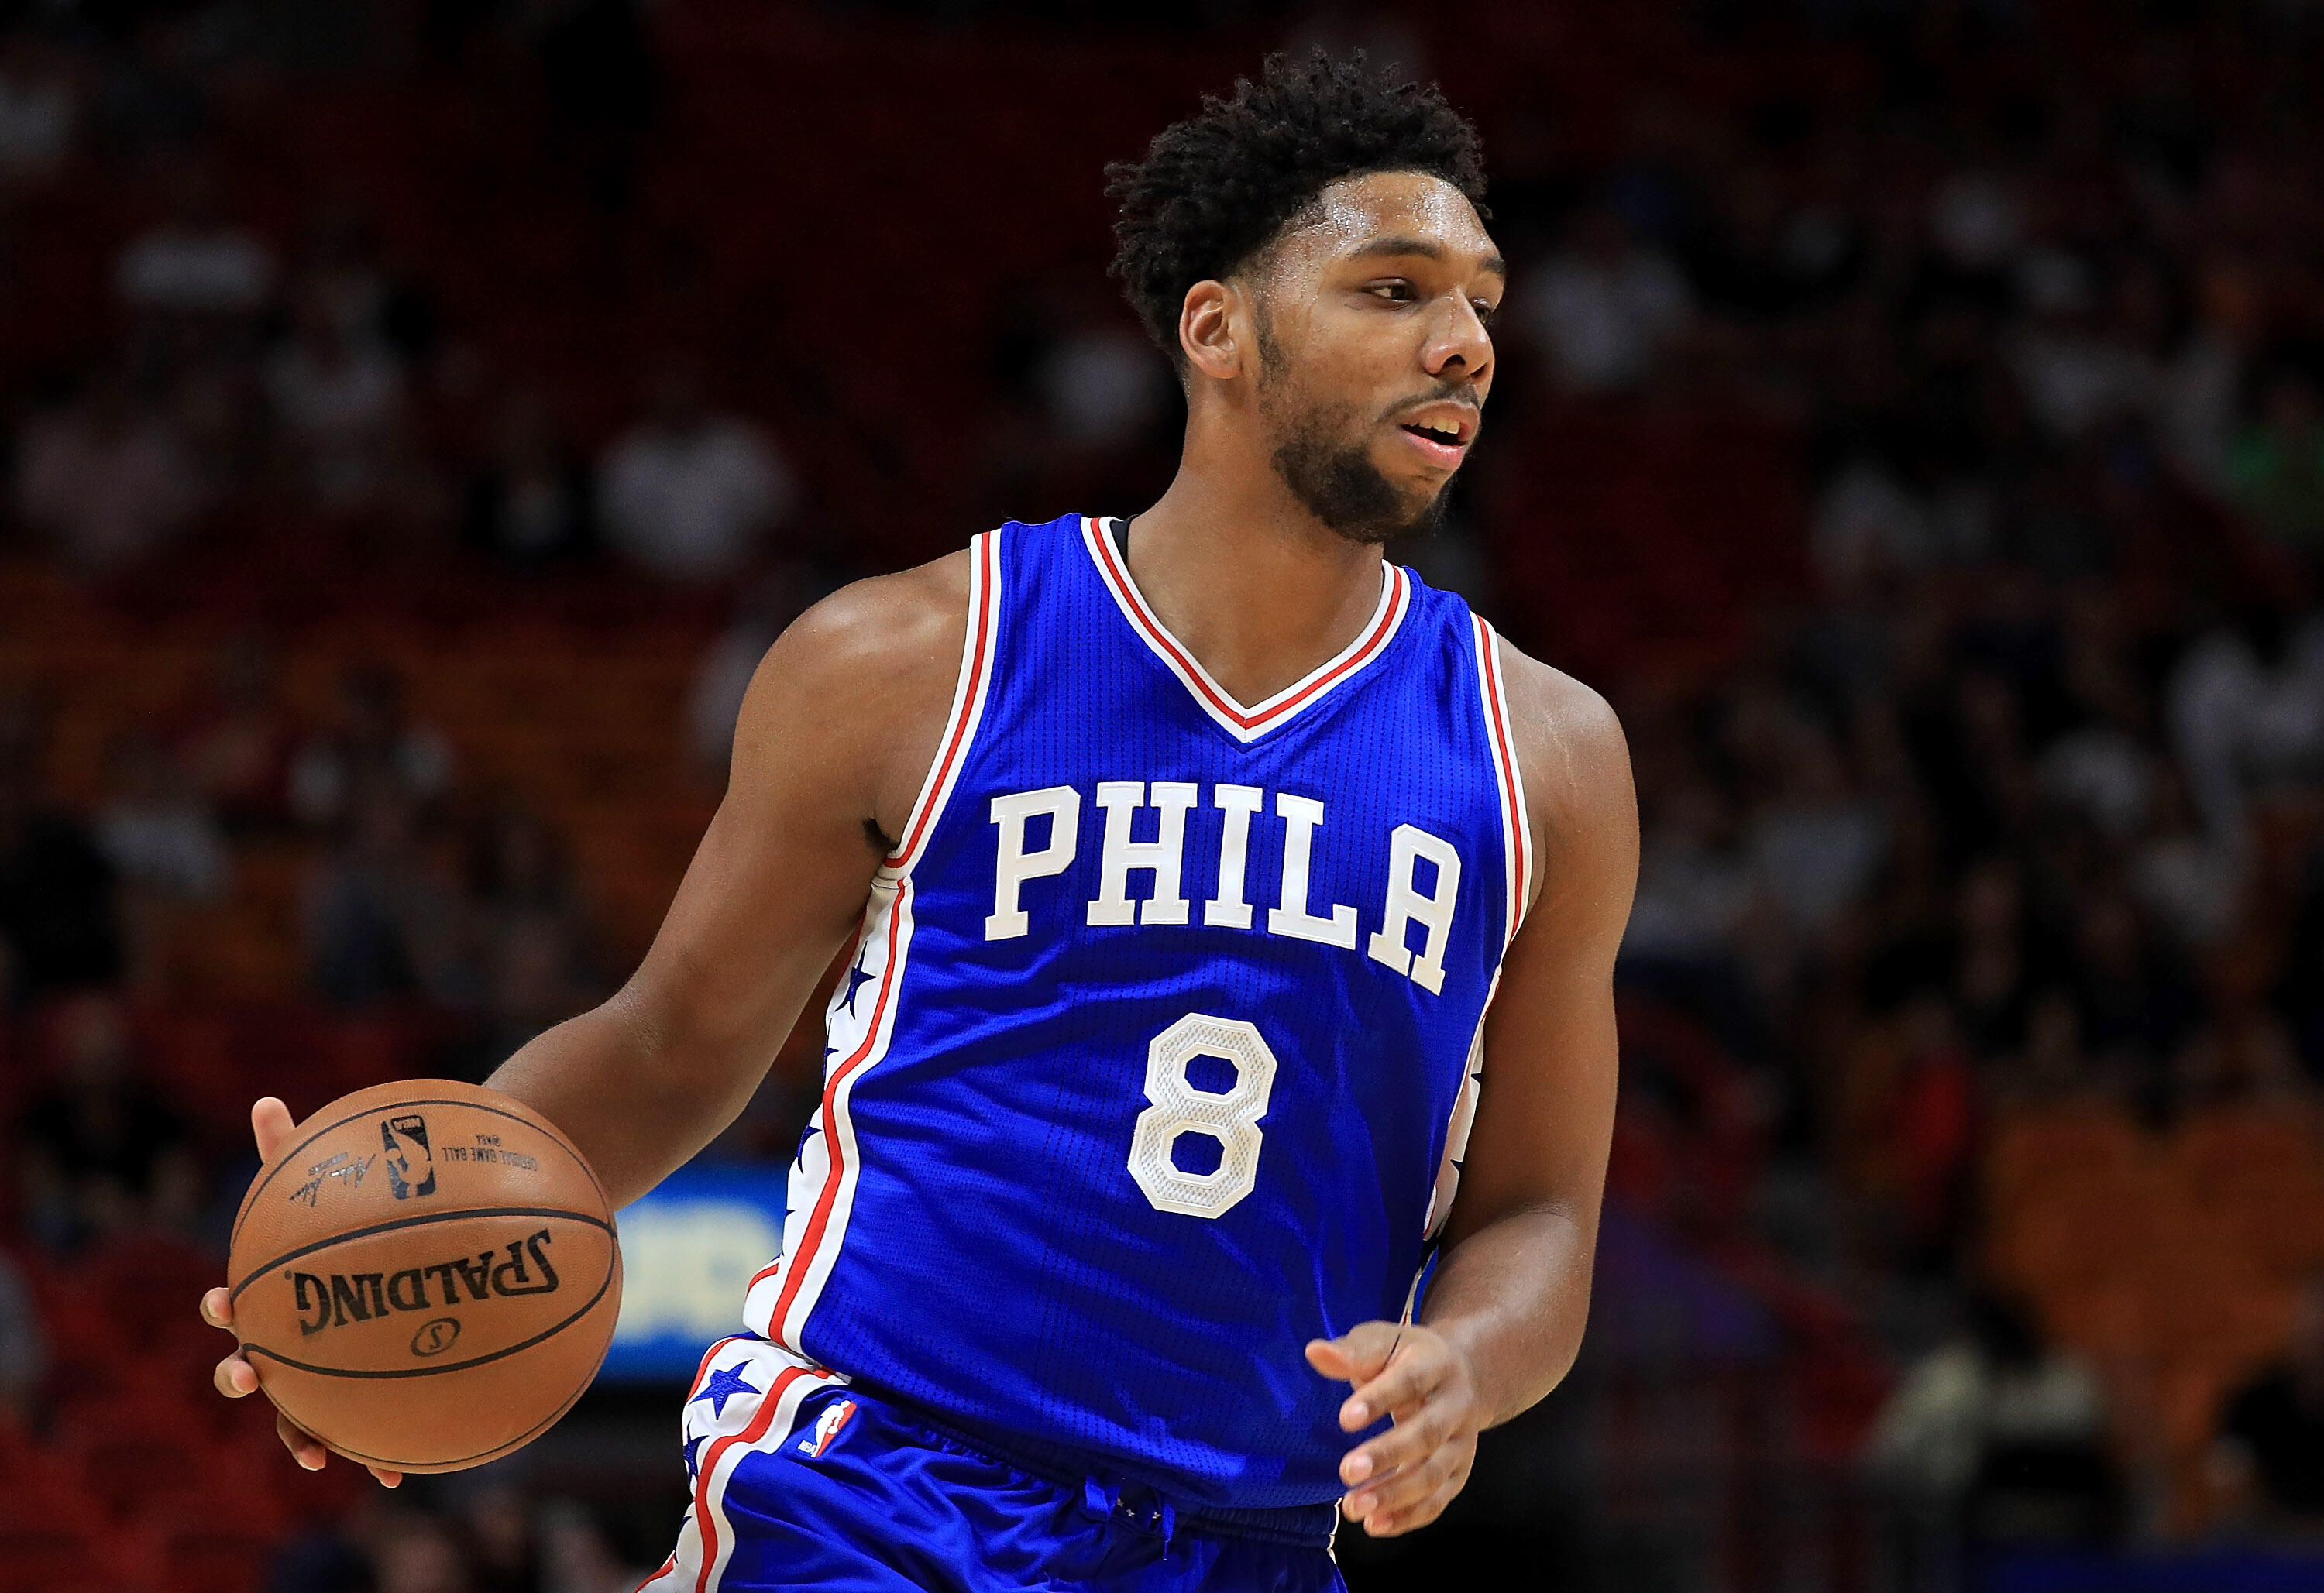 MIAMI, FL - OCTOBER 21: Jahlil Okafor #8 of the Philadelphia 76ers looks to pass during a preseason game against the Miami Heat at American Airlines Arena on October 21, 2016 in Miami, Florida.  (Photo by Mike Ehrmann/Getty Images)